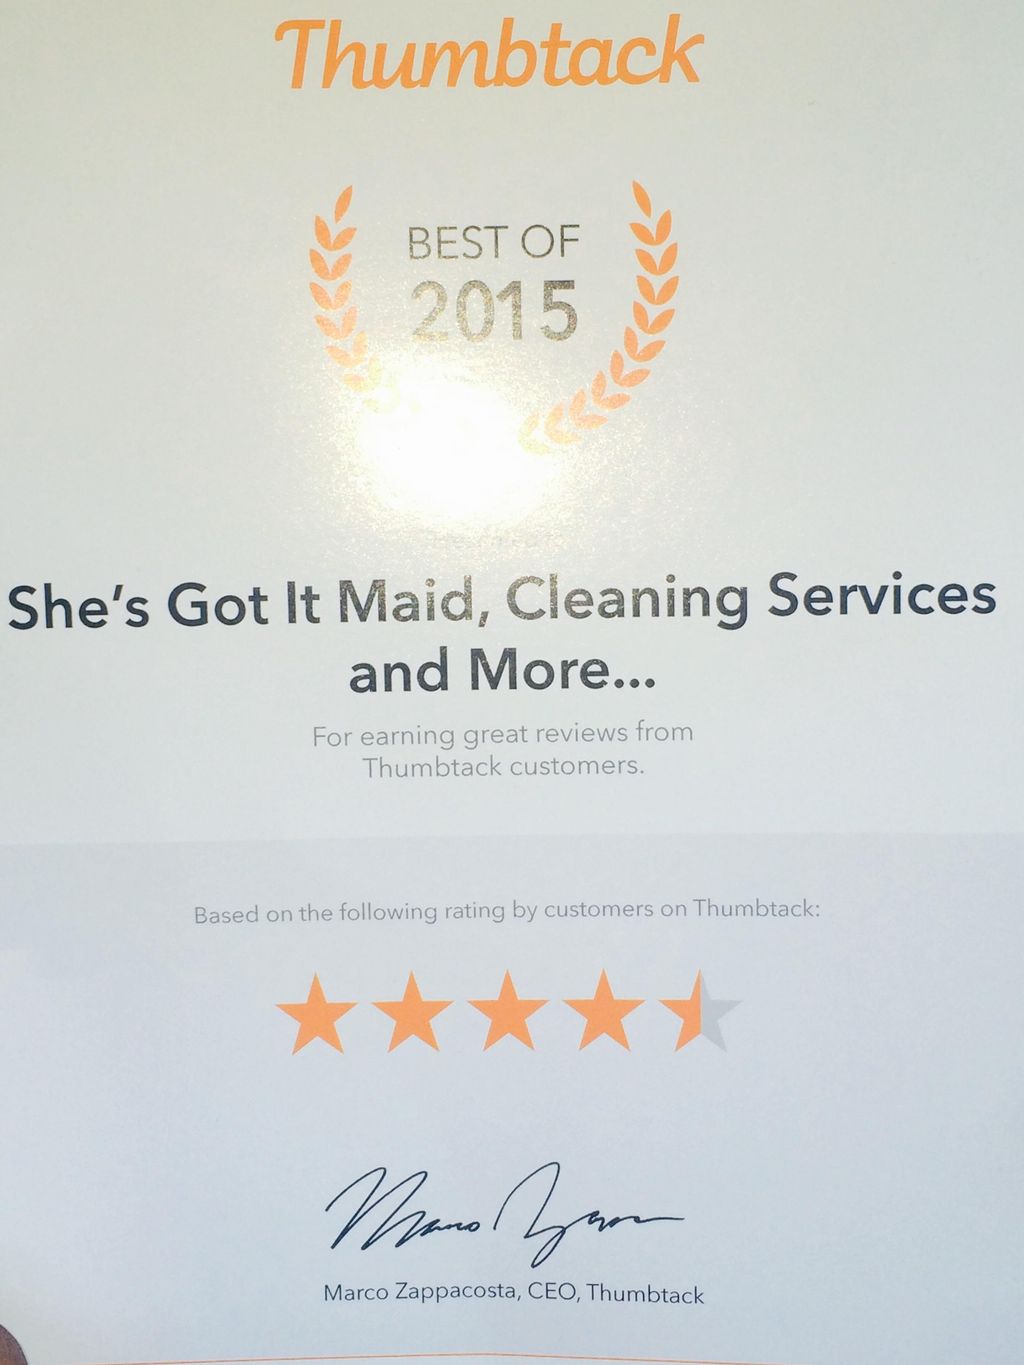 She's Got It Maid, Cleaning Services and More...